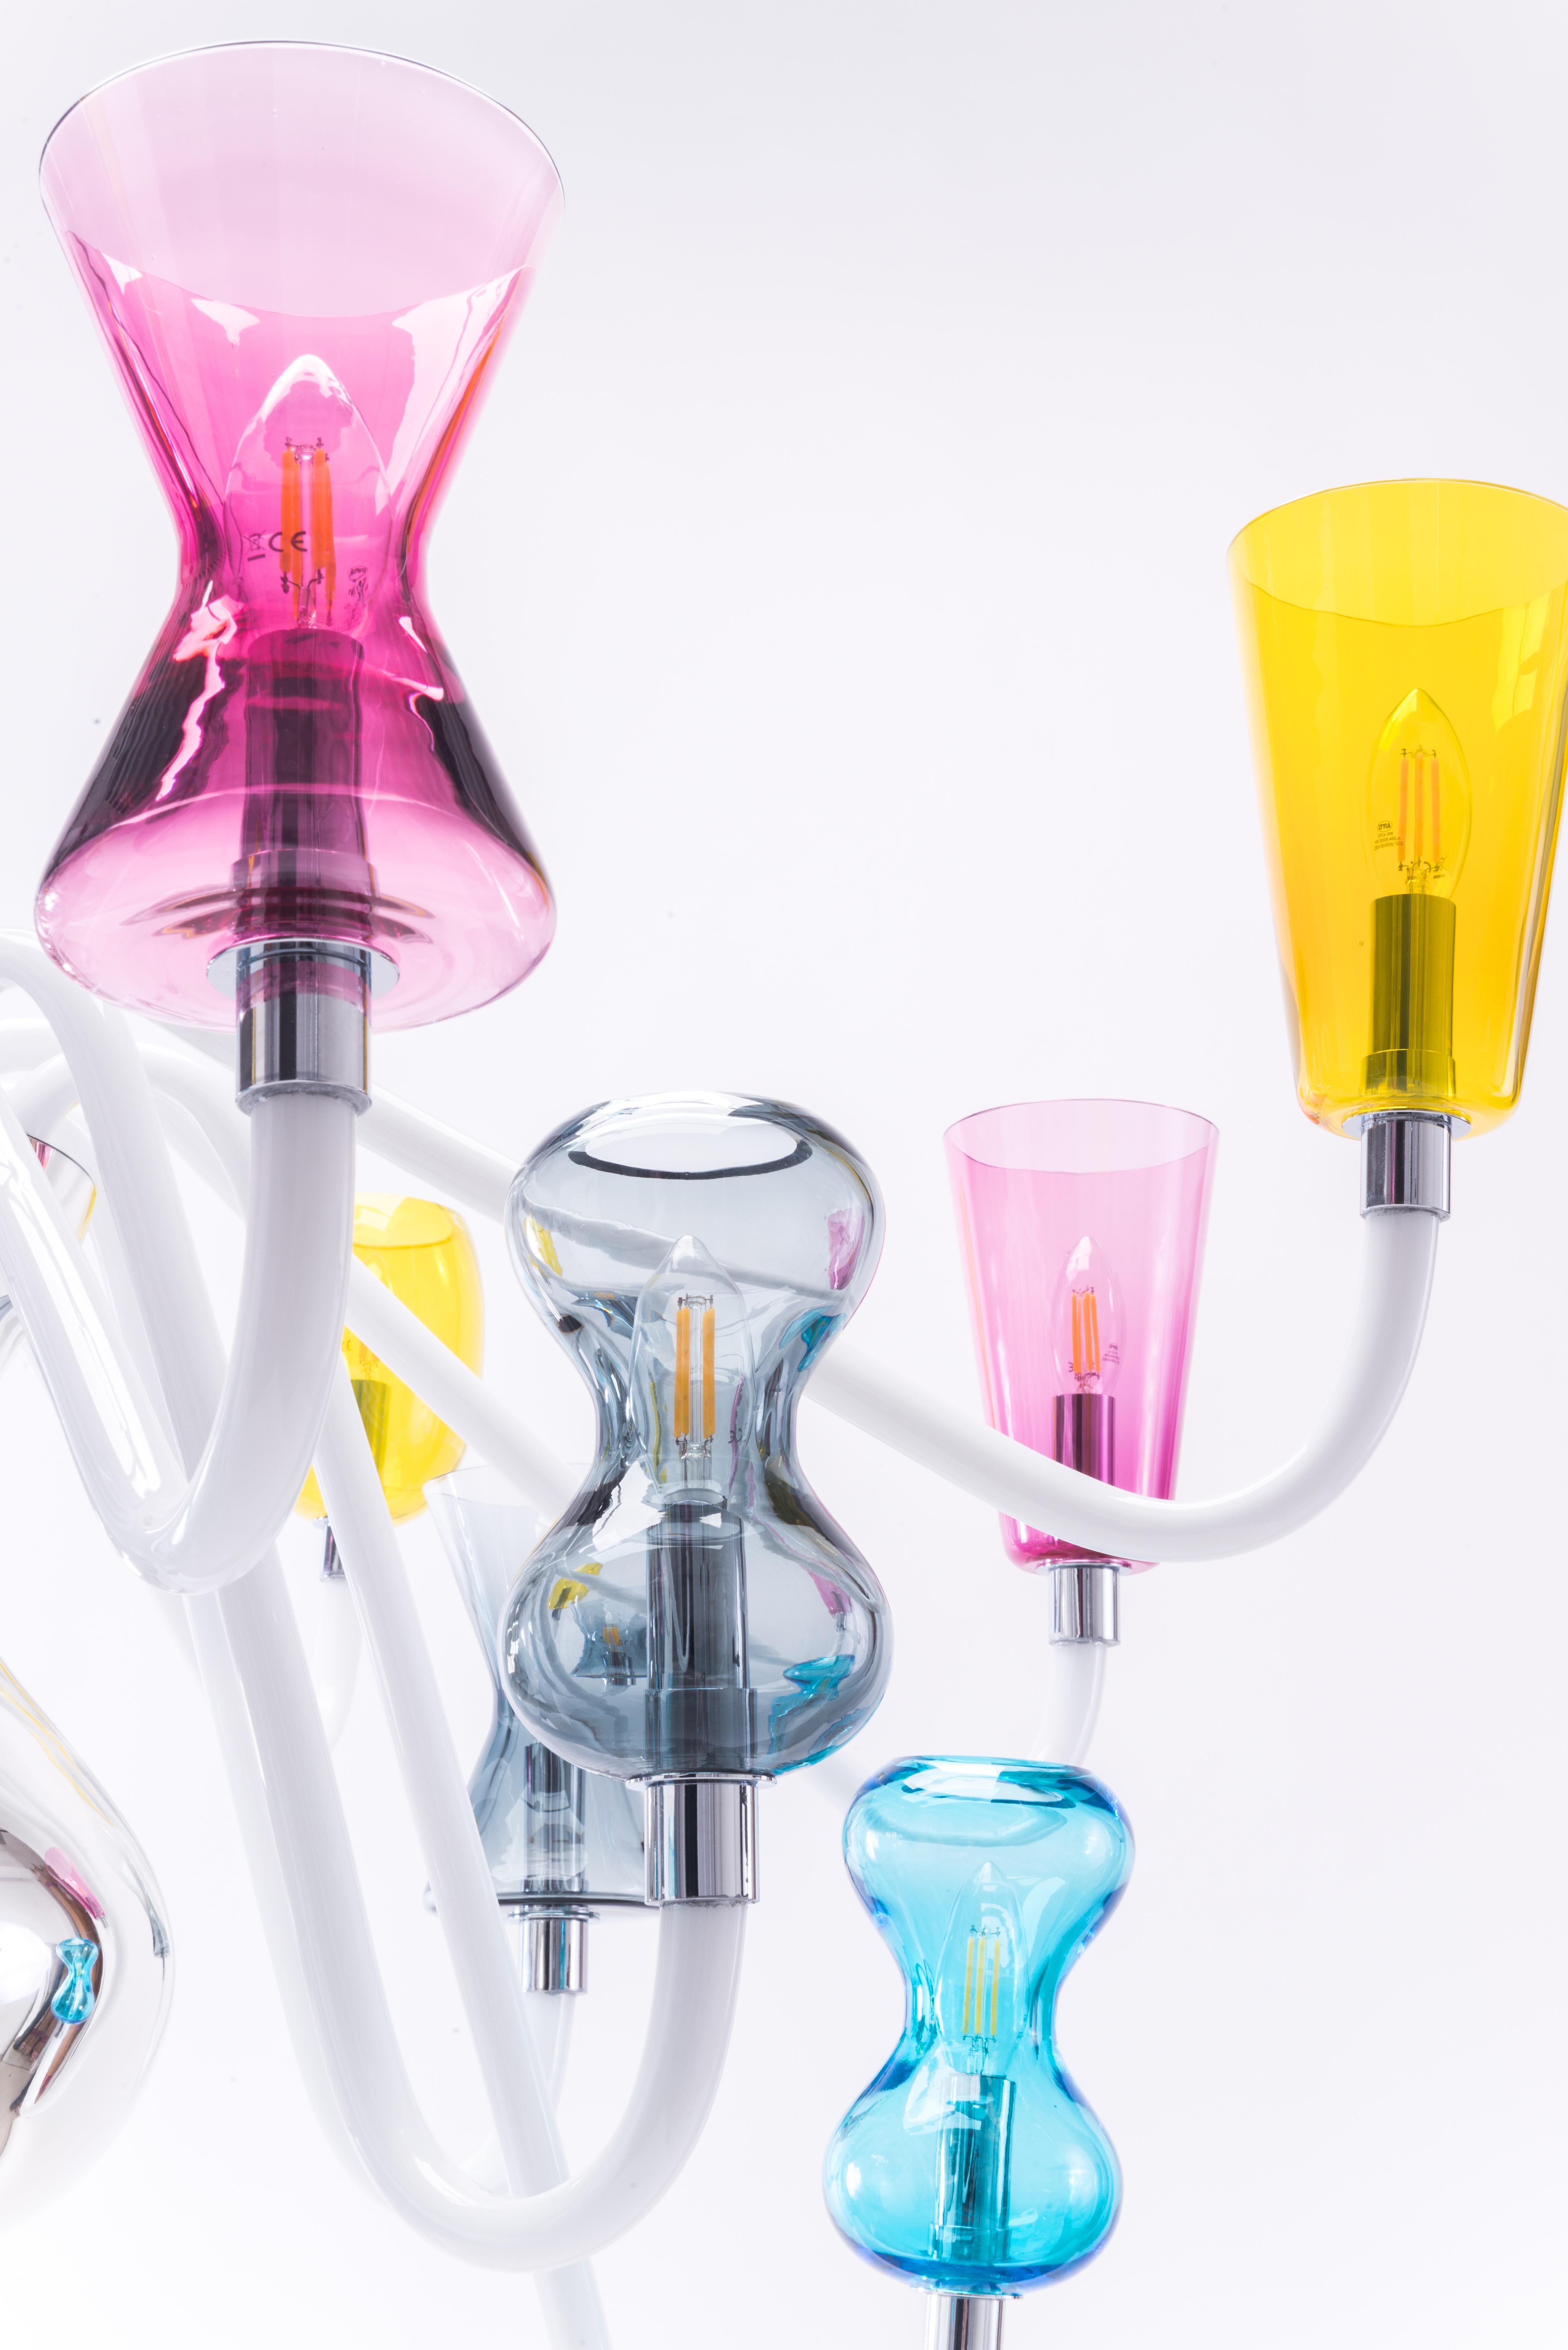 21st century Karim Rashid K1 chandelier 12-light Murano glass various colors.
Karim Rashid reinterprets the traditional Venetian chandelier for Purho, transforming it into an ethereal luminous sculpture. Consisting of a central body in mirrored